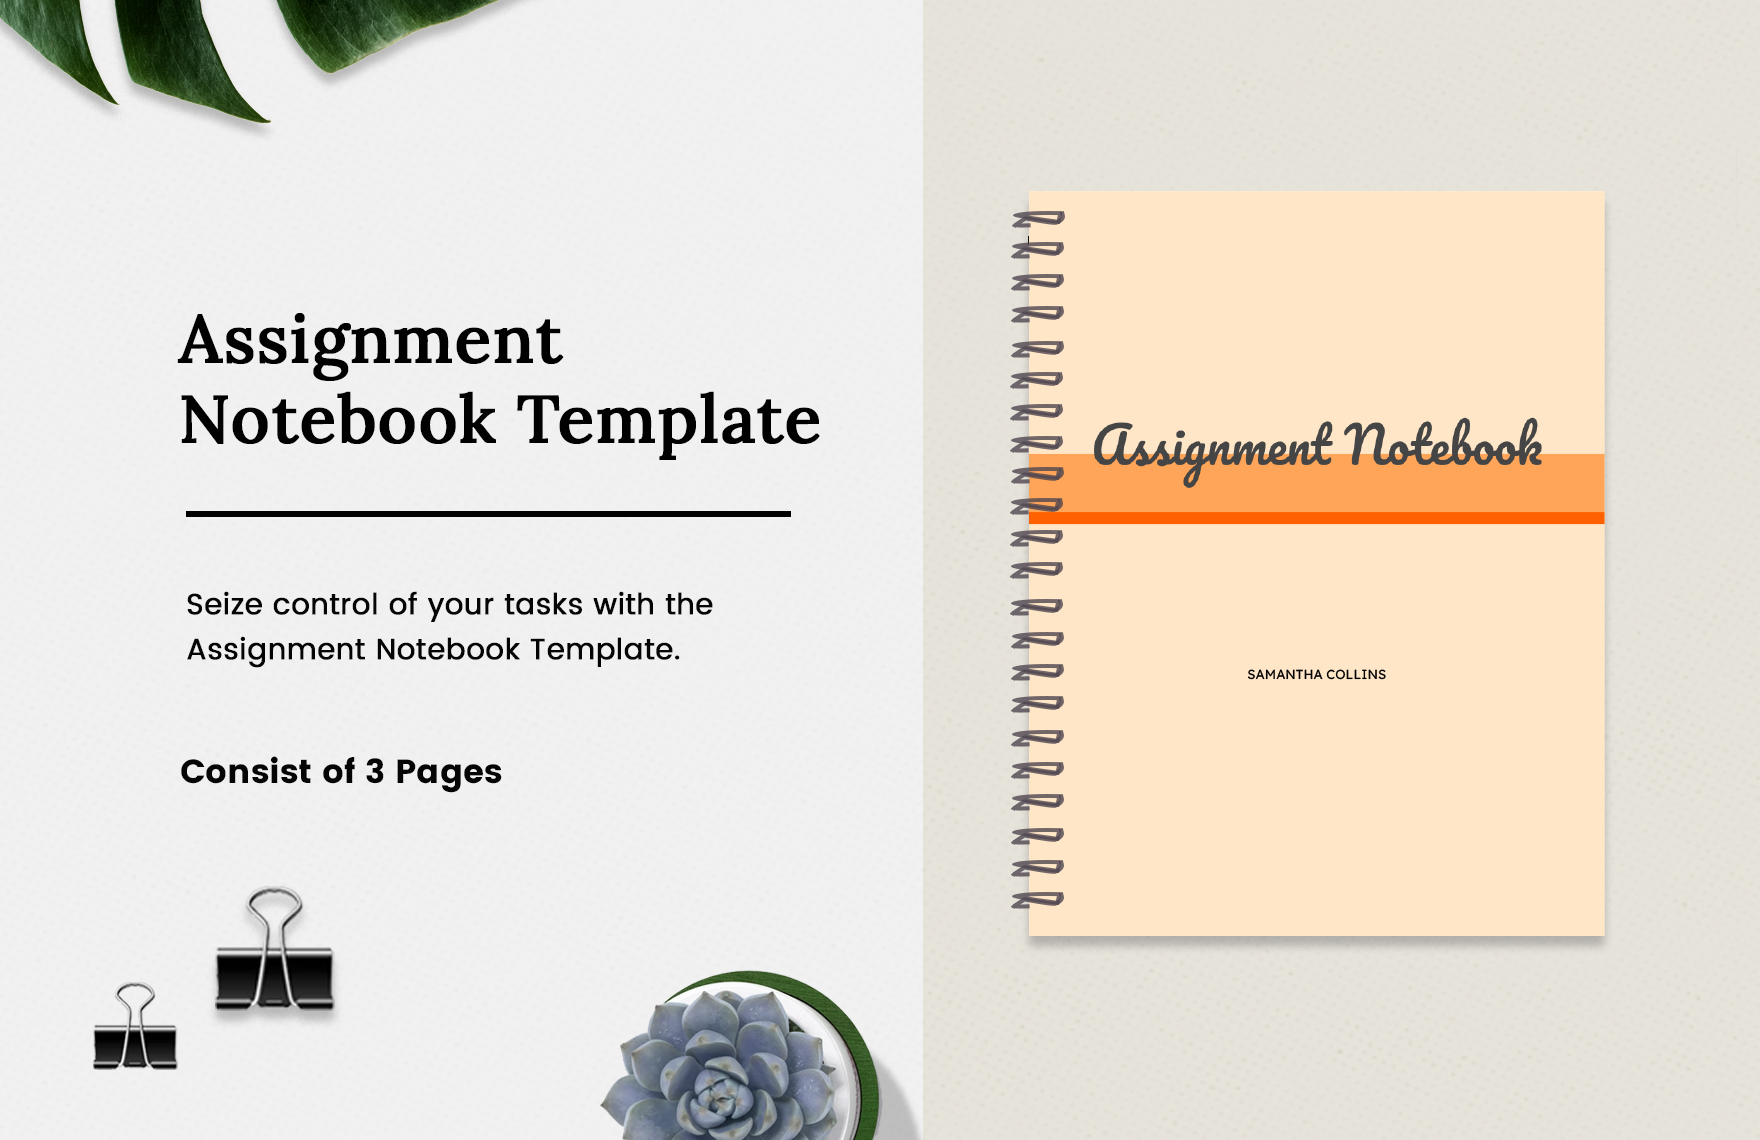 Assignment Notebook Template In MS Word Portable Documents GDocsLink 